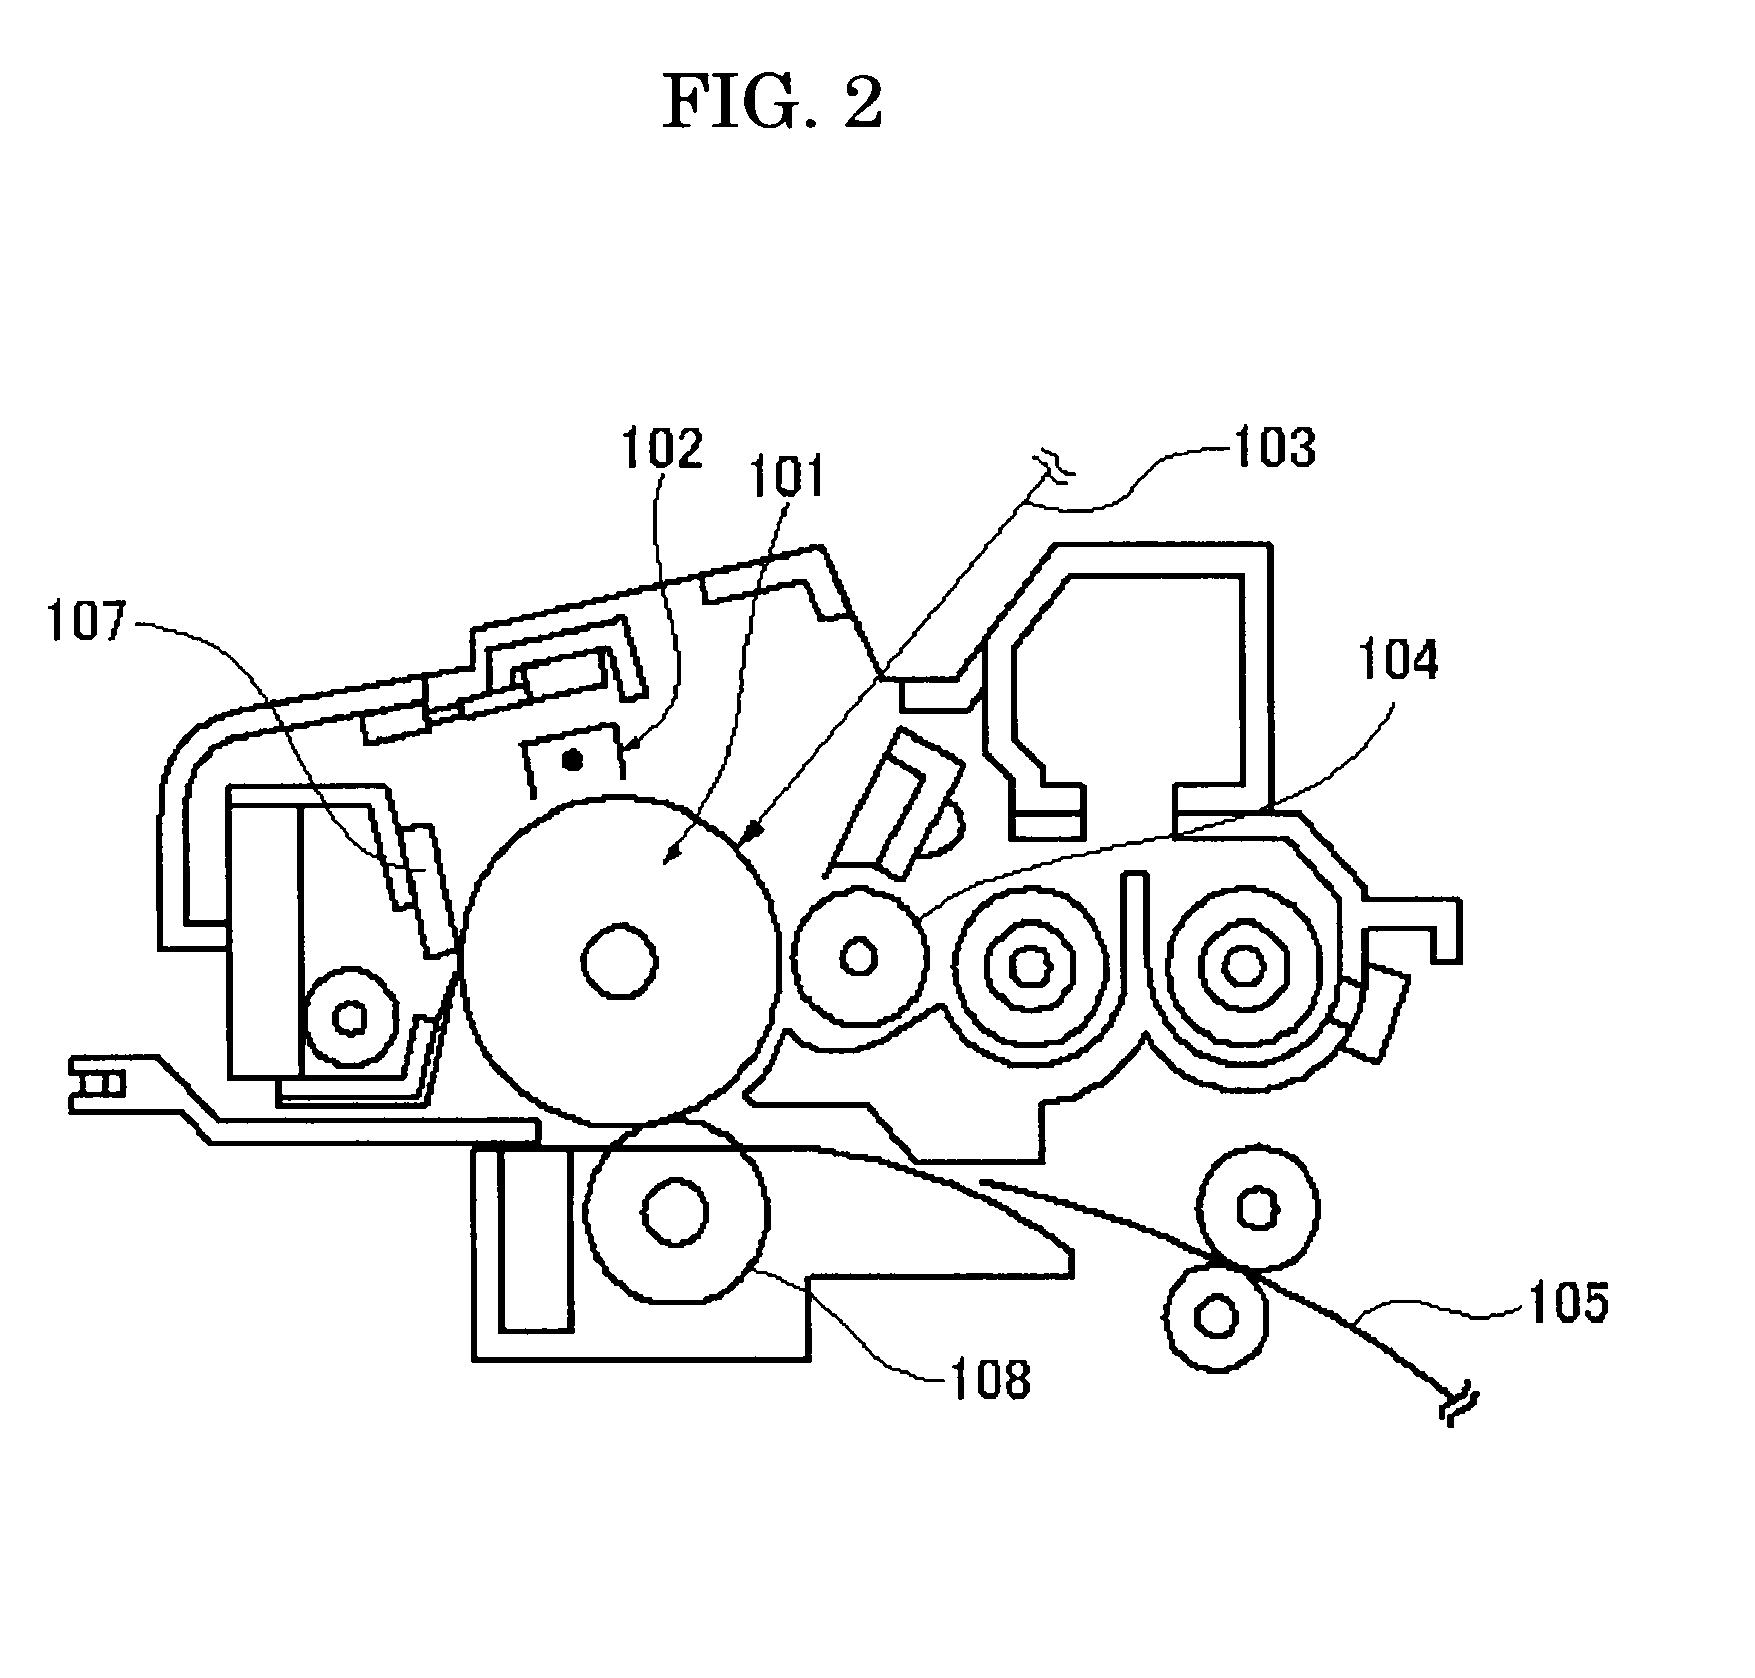 Toner for developing a latent electrostatic image, and image forming method and apparatus using the toner